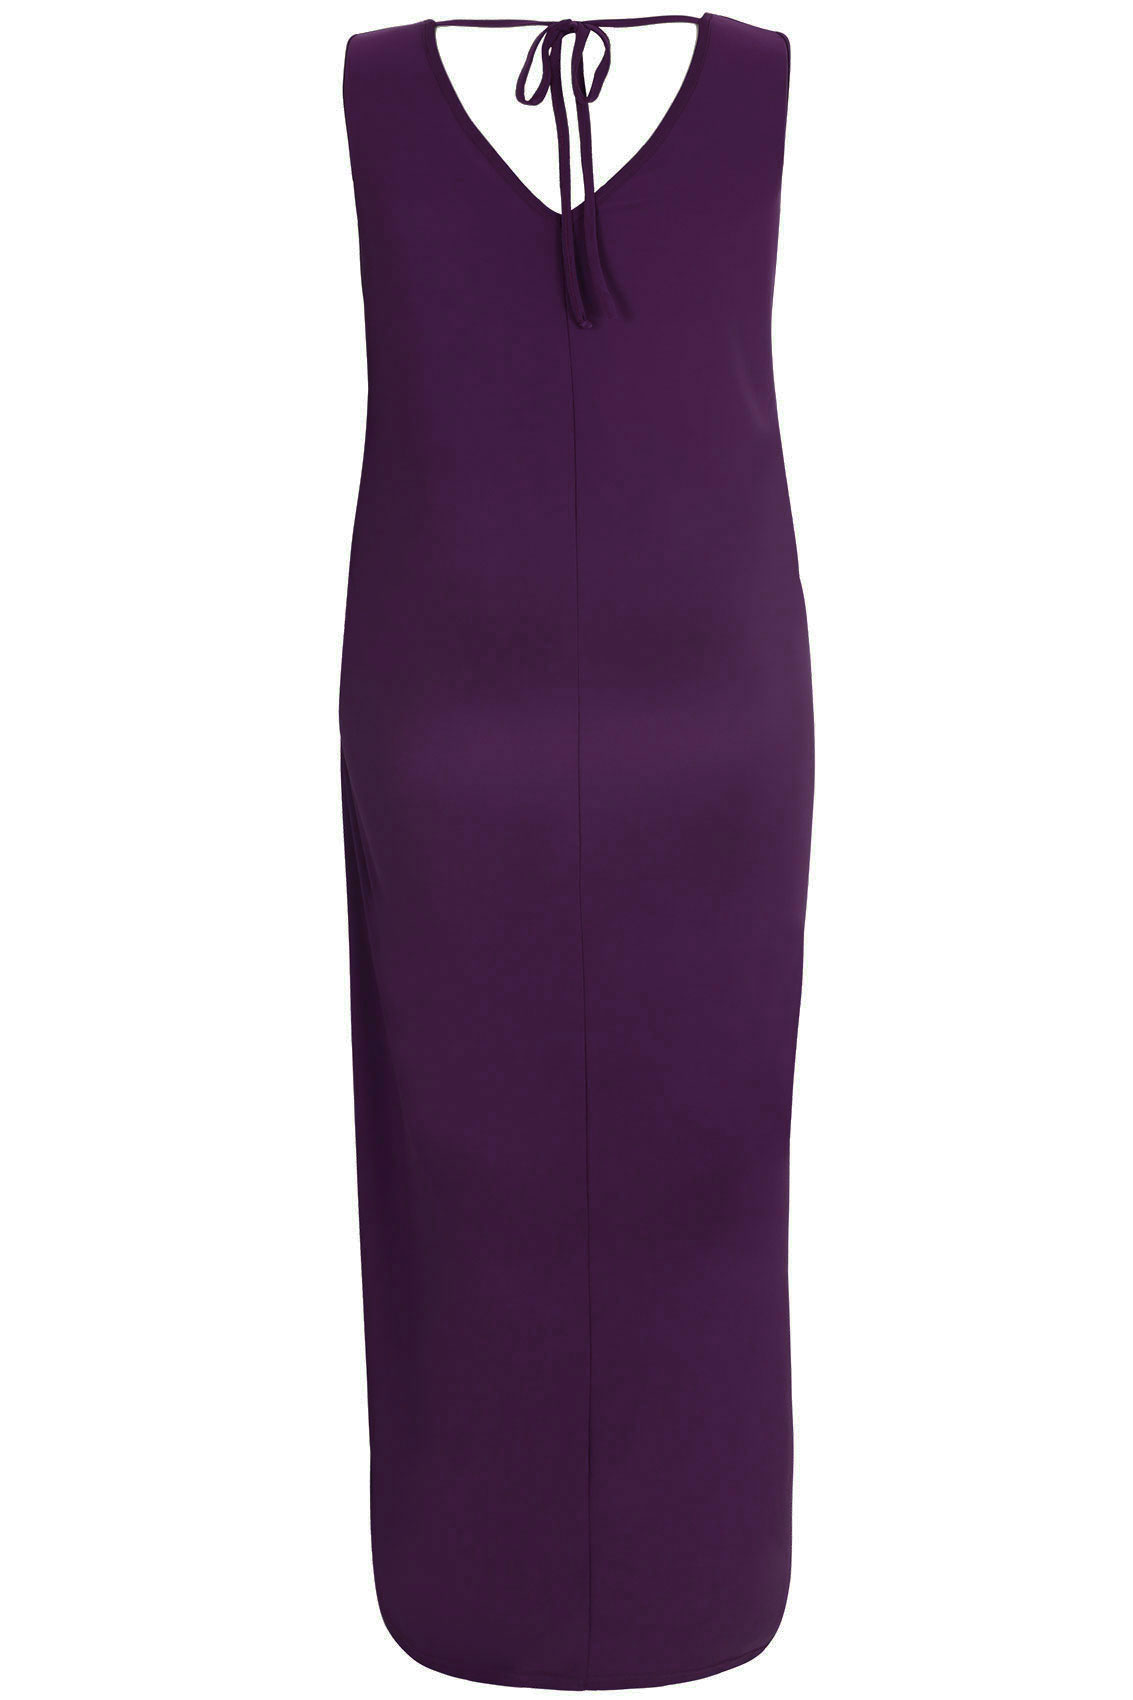 Purple V-Neck Maxi Dress With Twisted Knot Front Detail Plus Size 16 to 32